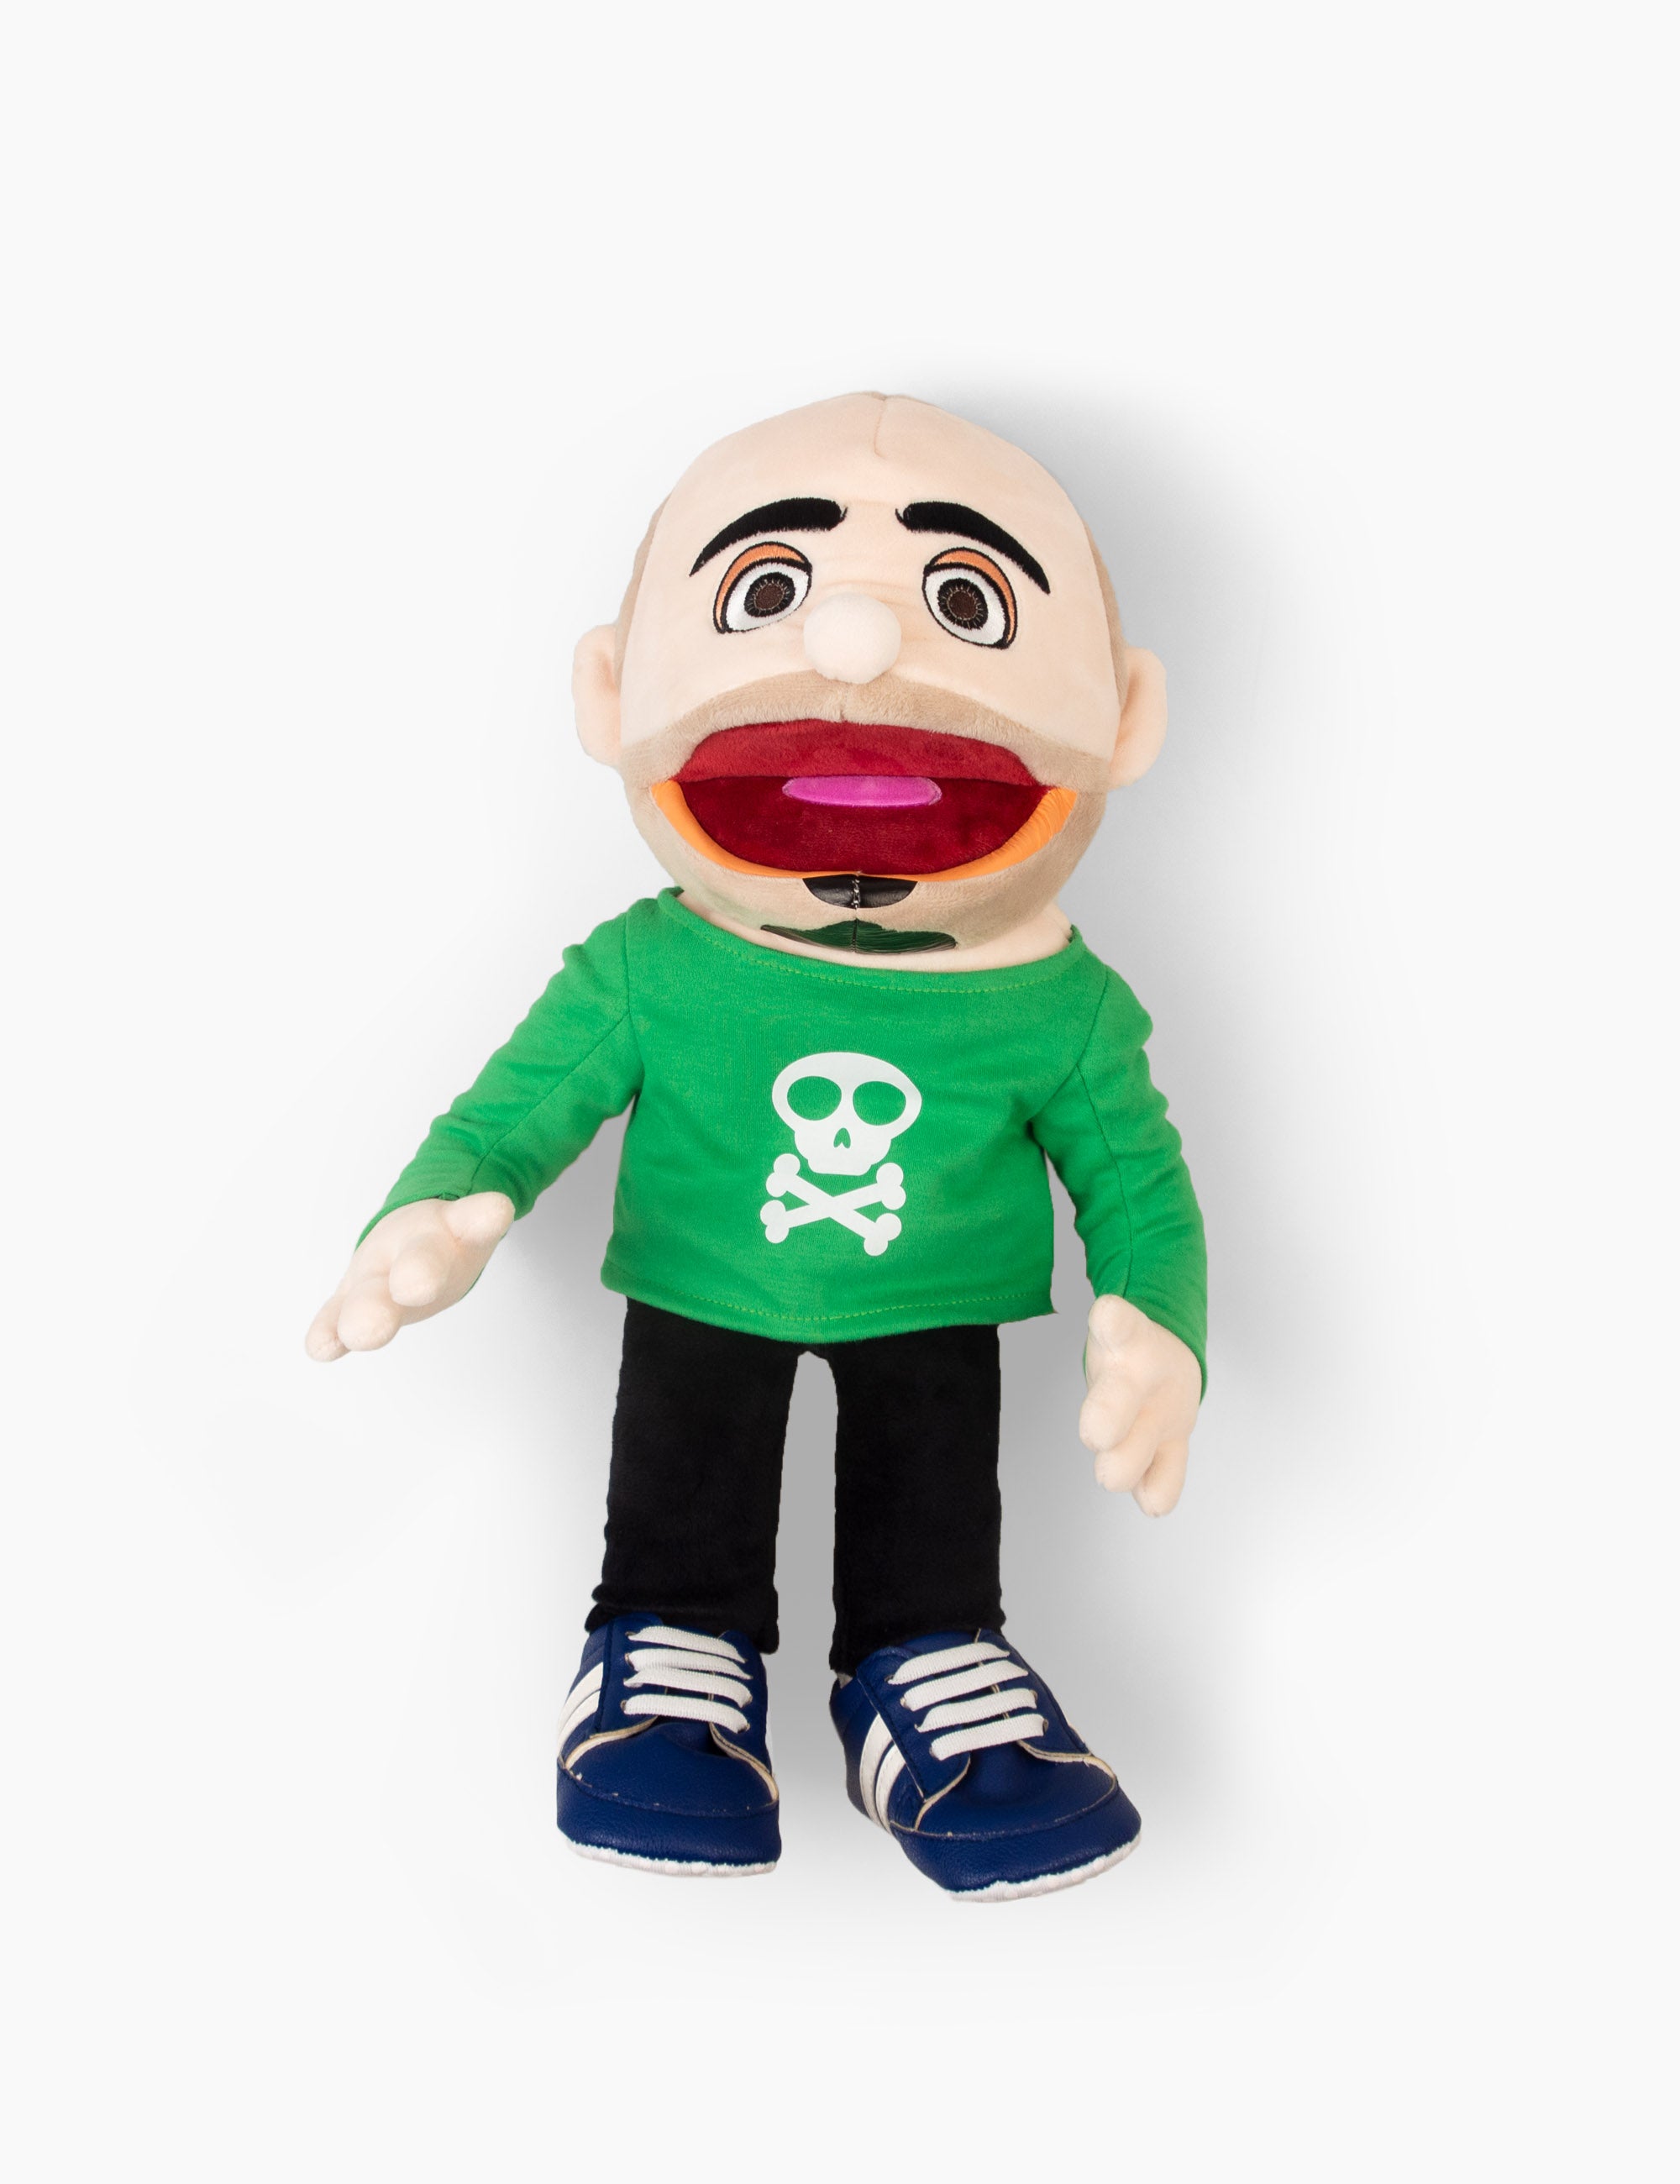 Jeffy Wallpaper - iXpap  Puppet costume, Puppets for kids, Disney precious  moments